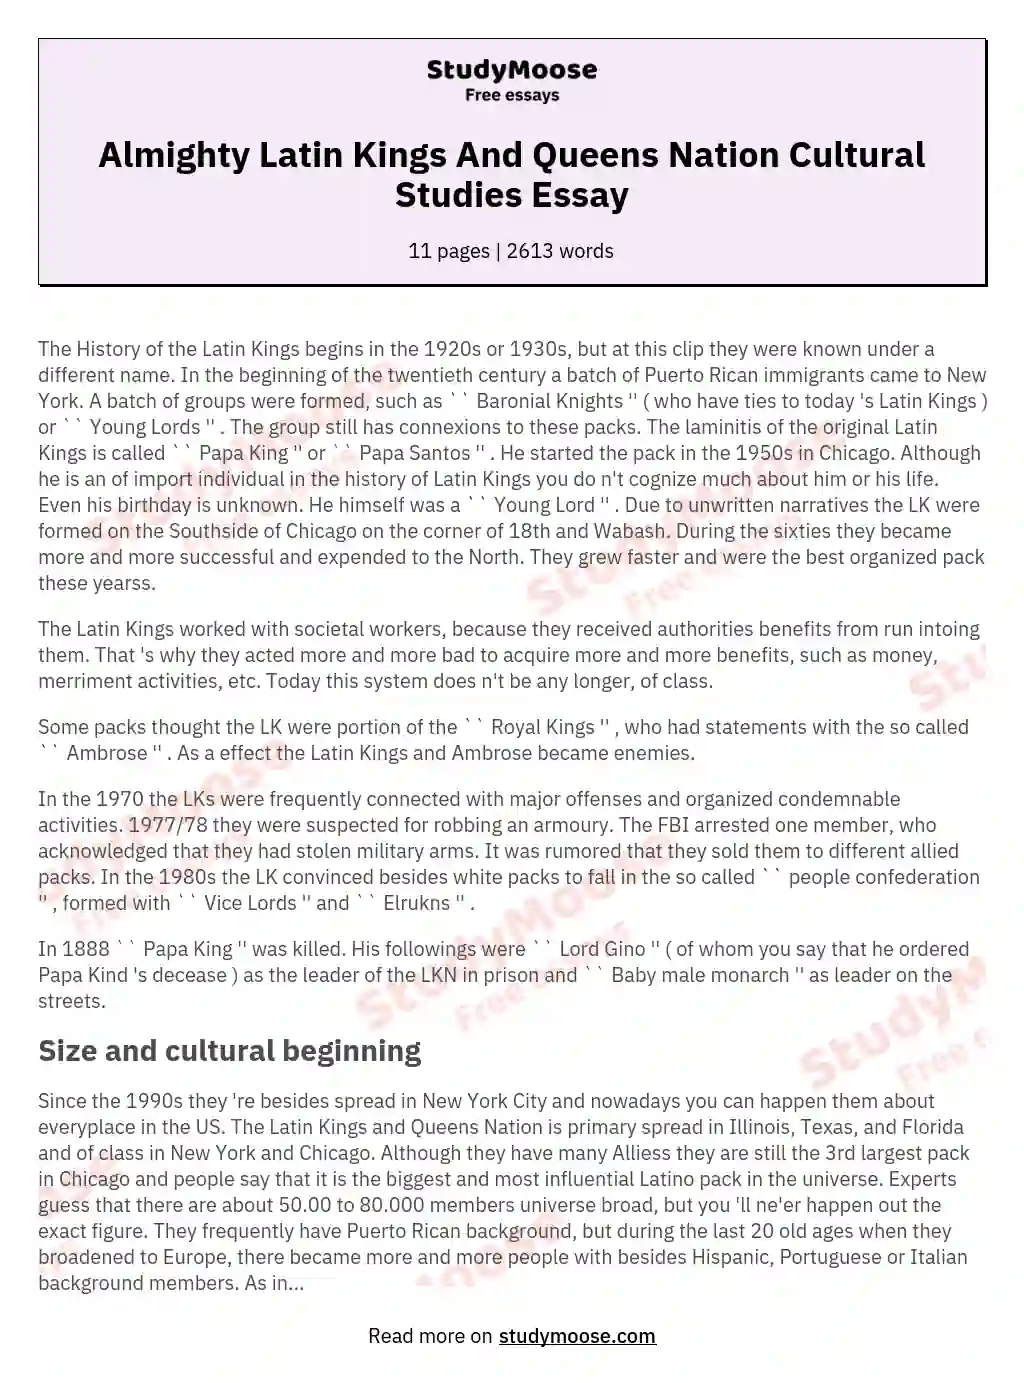 Almighty Latin Kings And Queens Nation Cultural Studies Essay